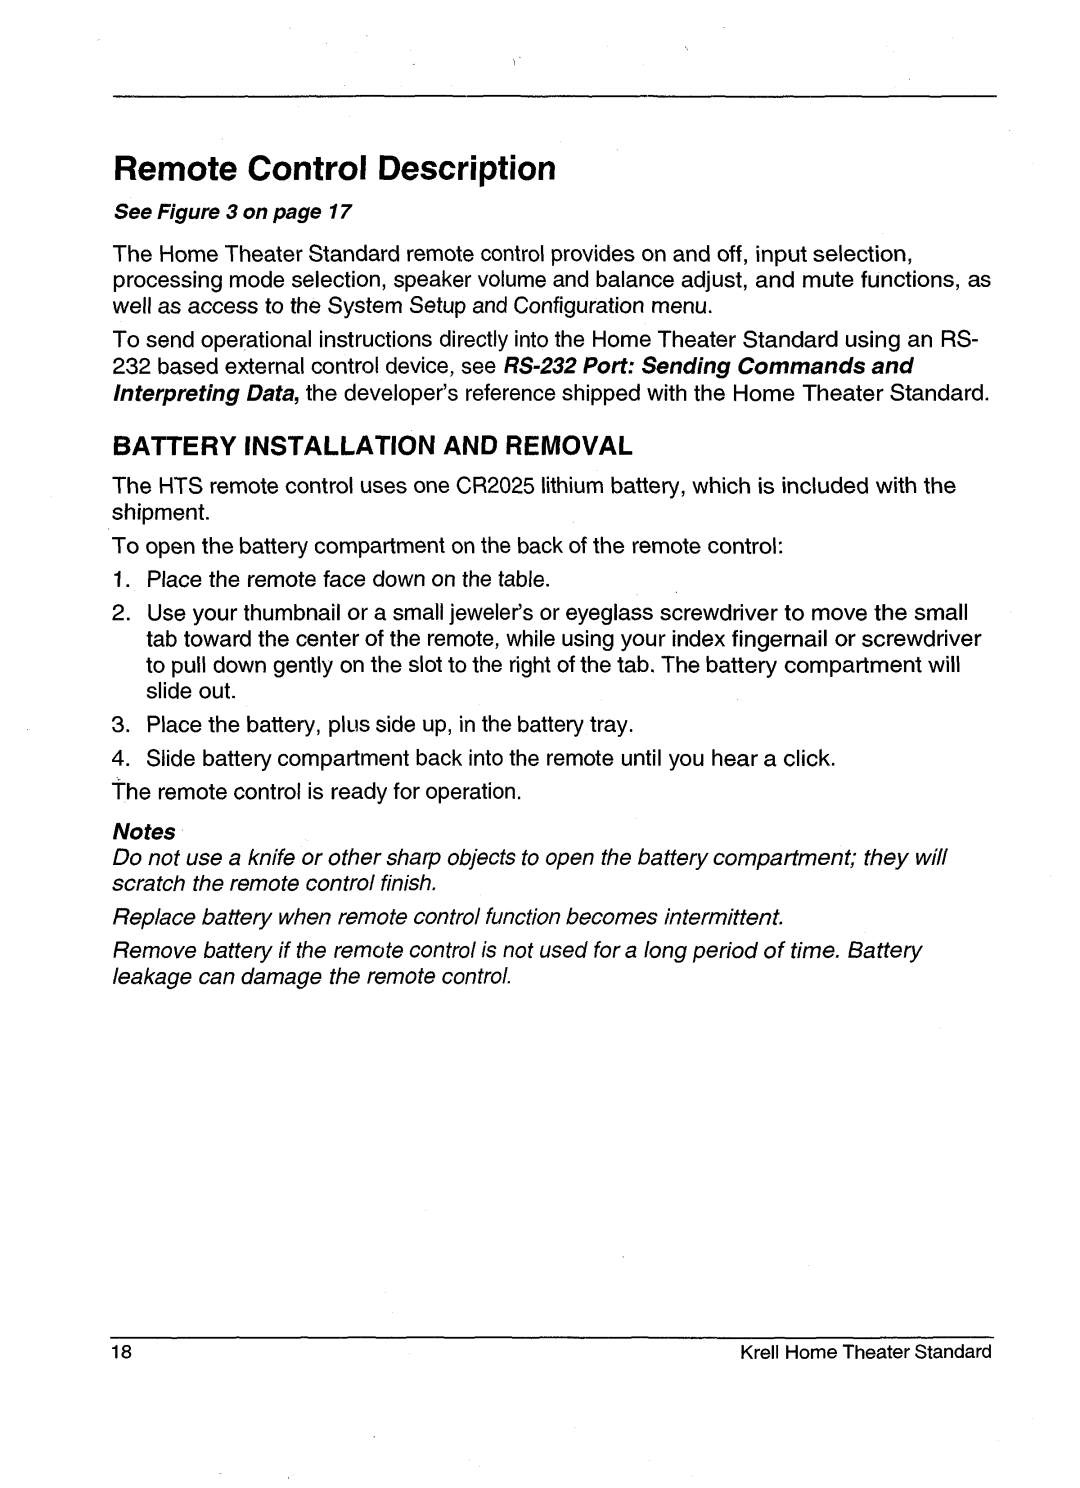 Krell Industries HTS 2 manual RemoteControl Description, Battery Installation And Removal, SeeFigure 3 on page17, Notes 